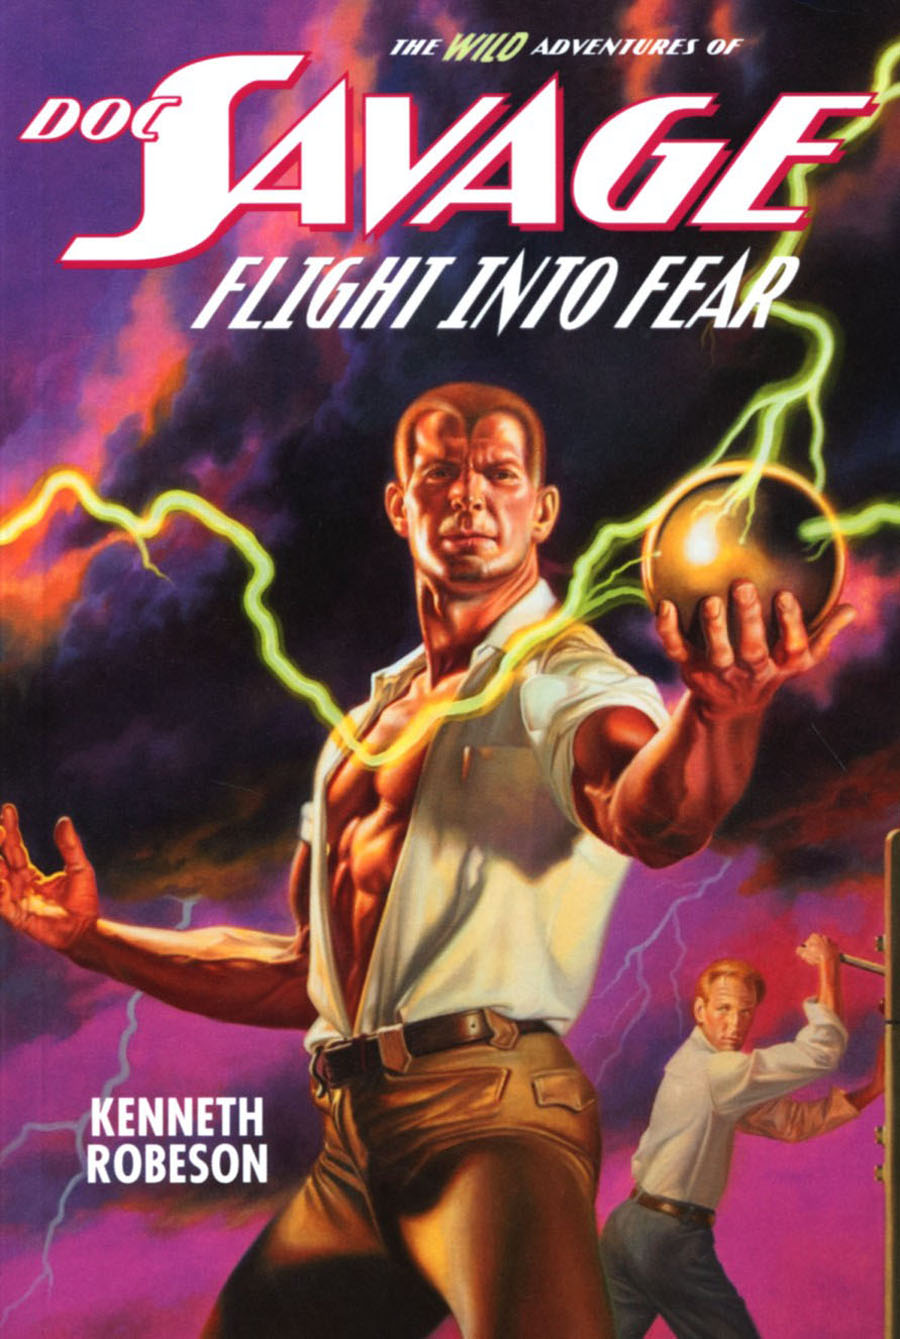 Wild Adventures Of Doc Savage Flight Into Fear SC Expanded Edition